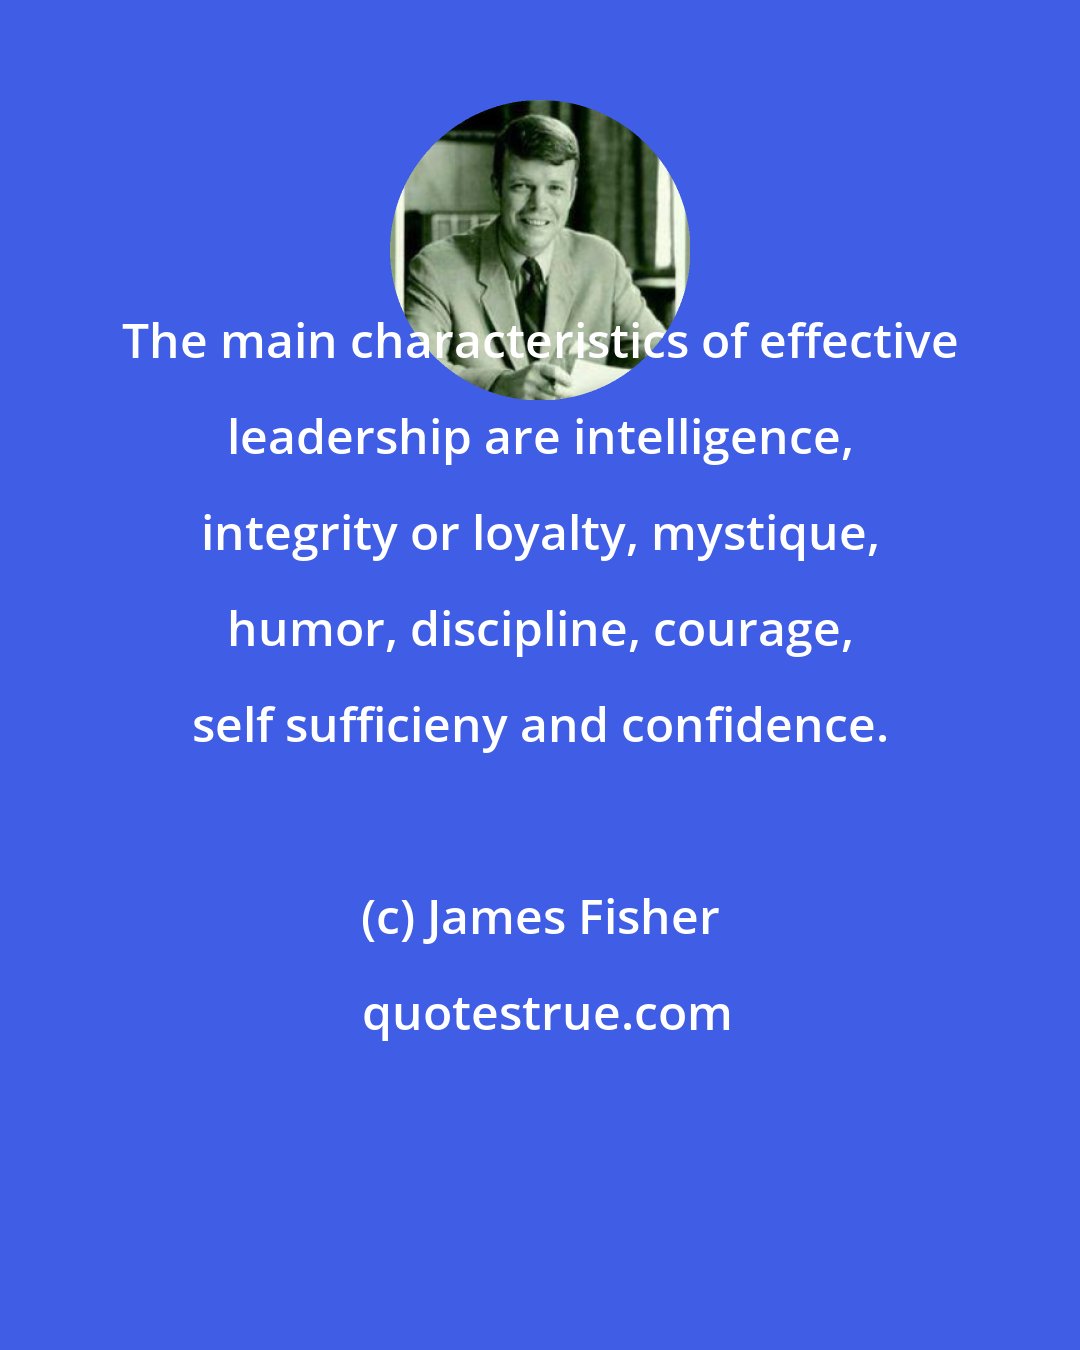 James Fisher: The main characteristics of effective leadership are intelligence, integrity or loyalty, mystique, humor, discipline, courage, self sufficieny and confidence.